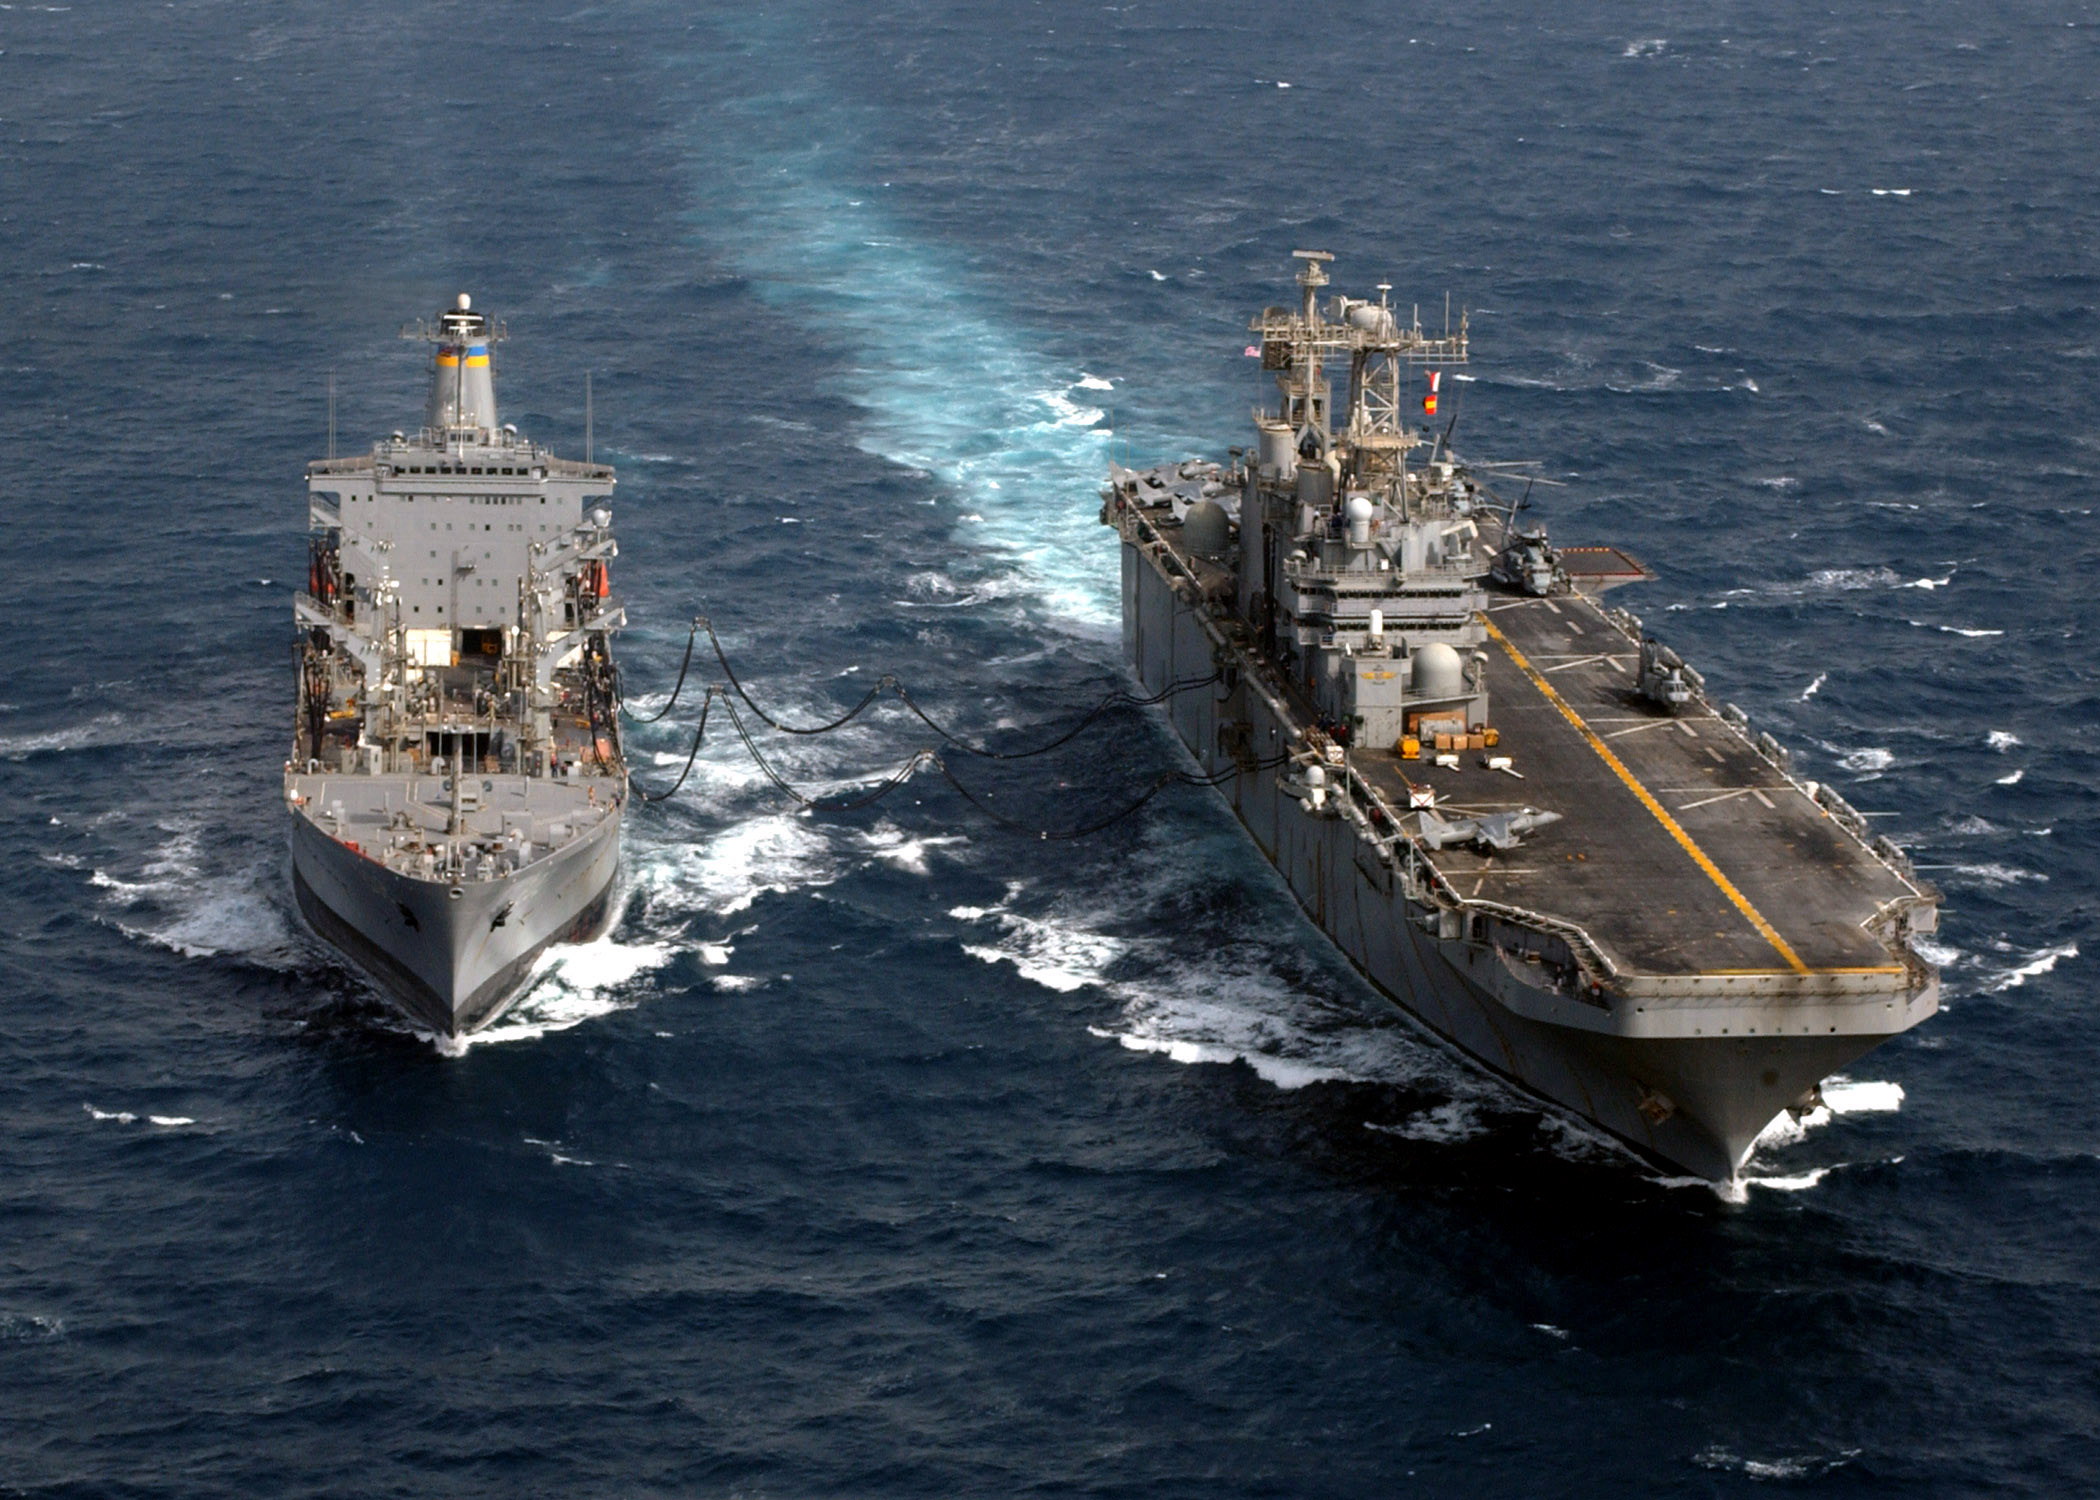 US Navy 030407-N-2515C-005 USS Tarawa (LHA 1) receives fuel during an underway replenishment (UNREP) with Military Sealift Command Oiler USNS Yukon (T-AO 202)